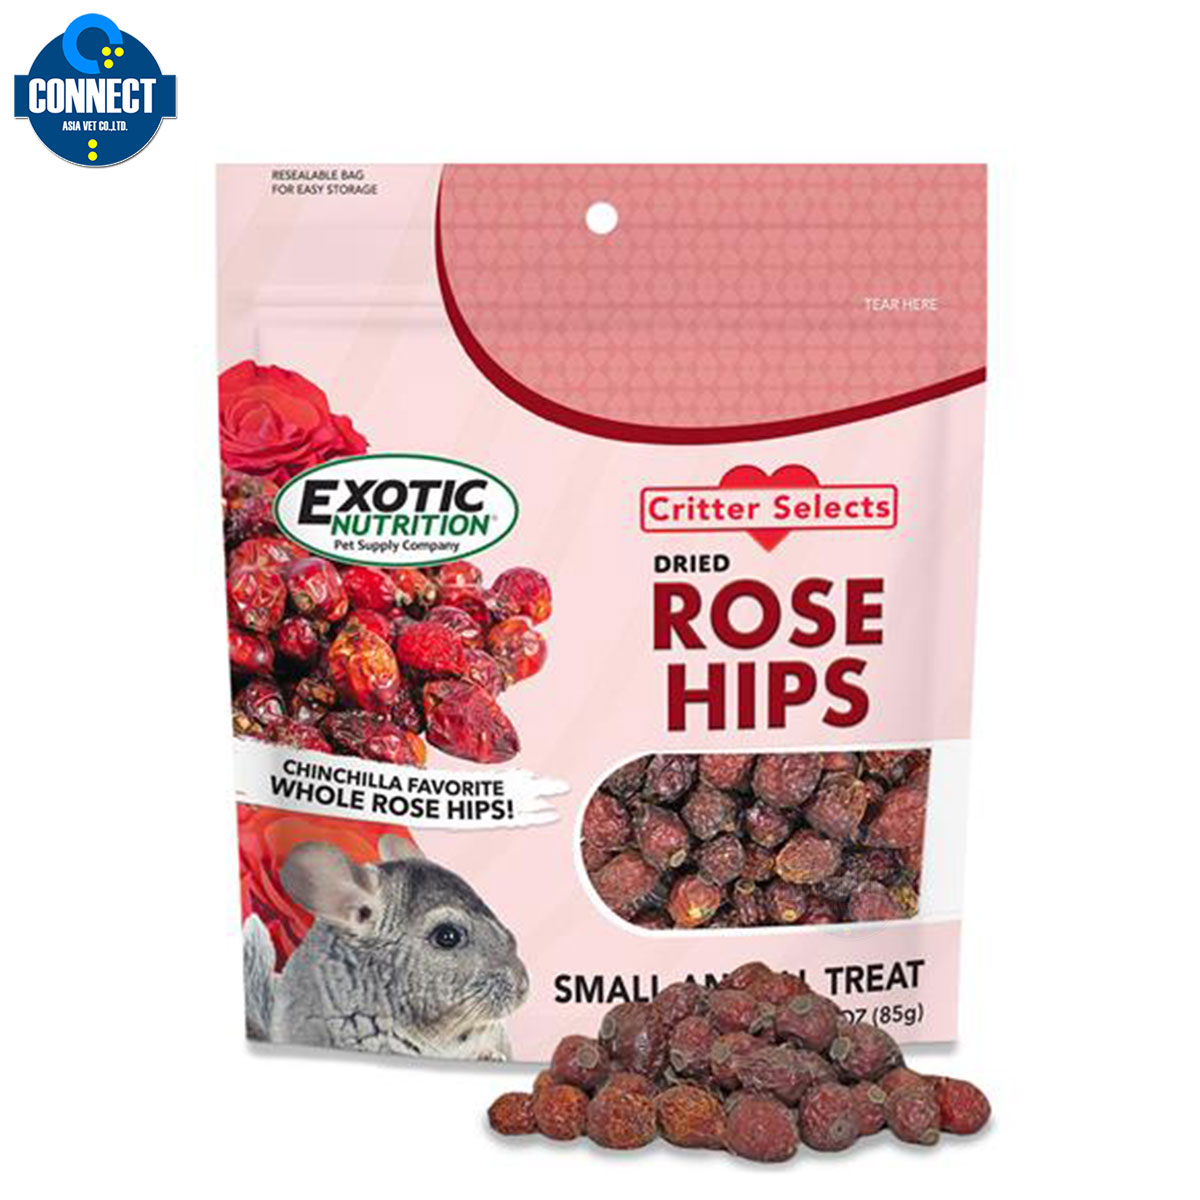 DRIED ROSE HIPS